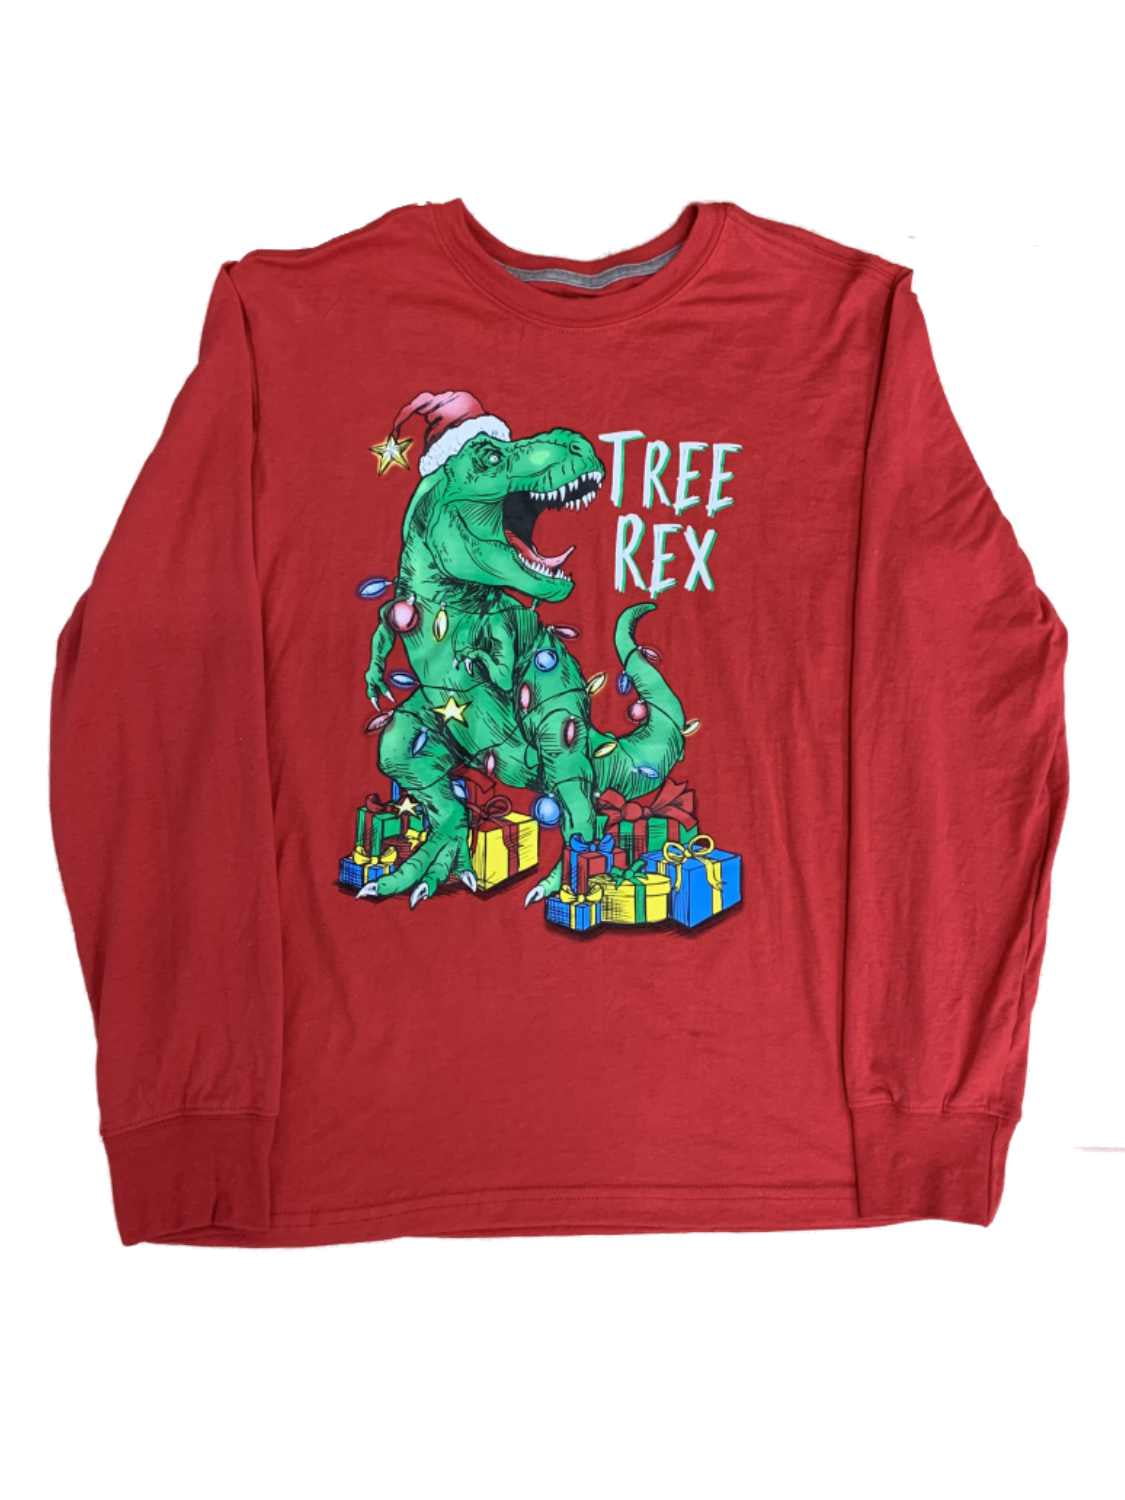 1Tee Kids Girls Tree Rex Caught in Christmas Lights and Tinsel T-Shirt